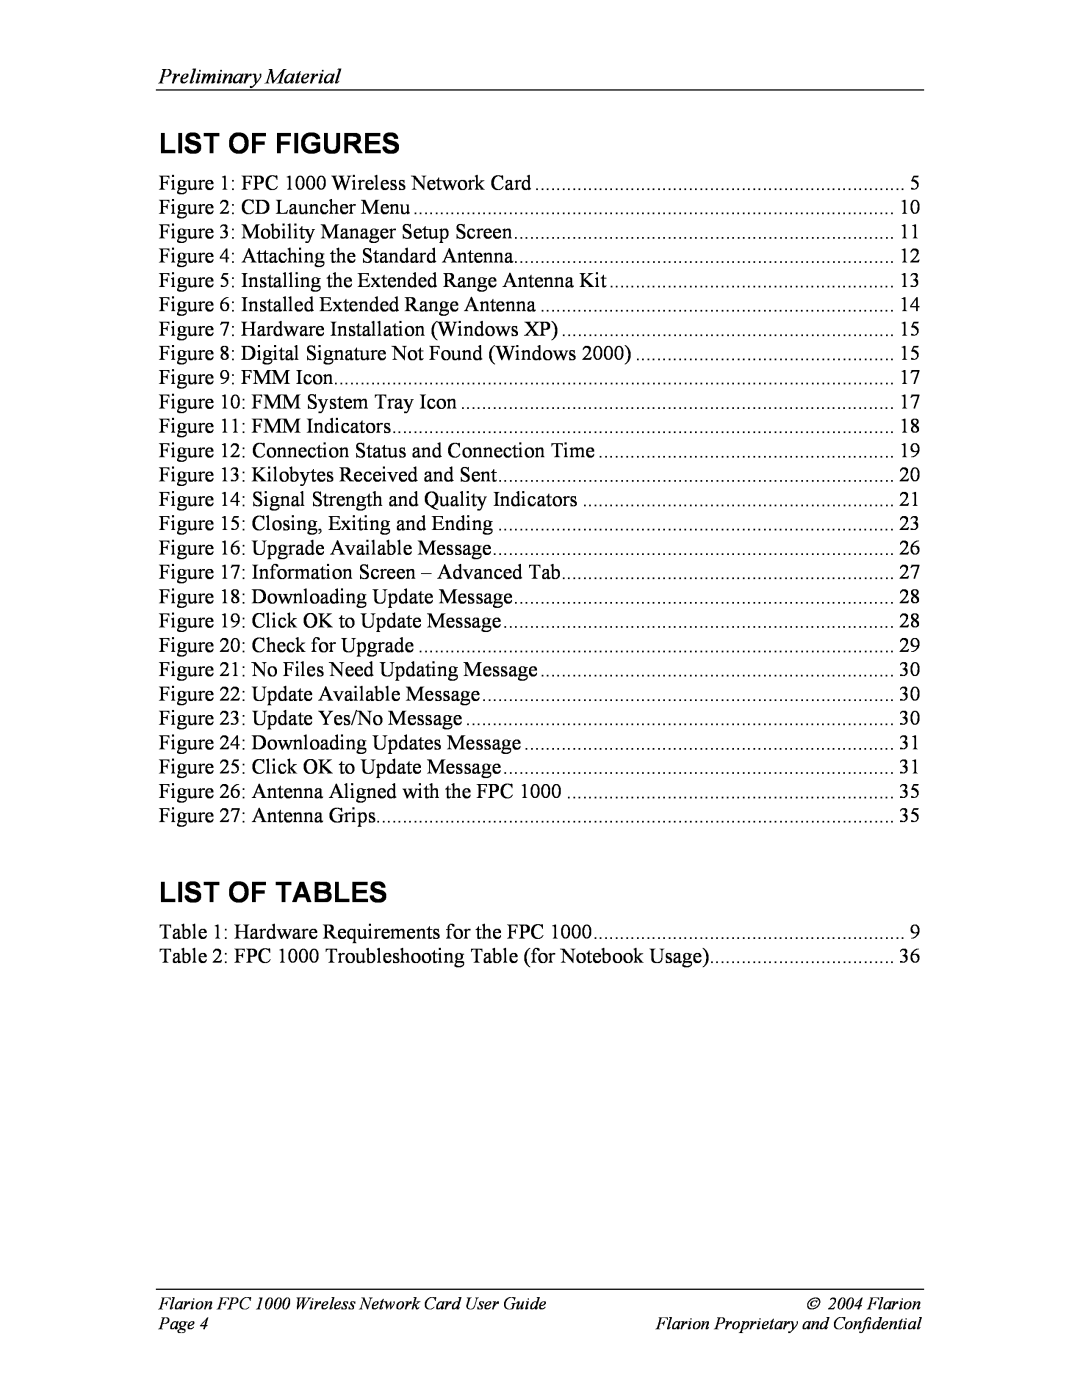 GE FPC 1000 manual List Of Figures, List Of Tables, Preliminary Material 